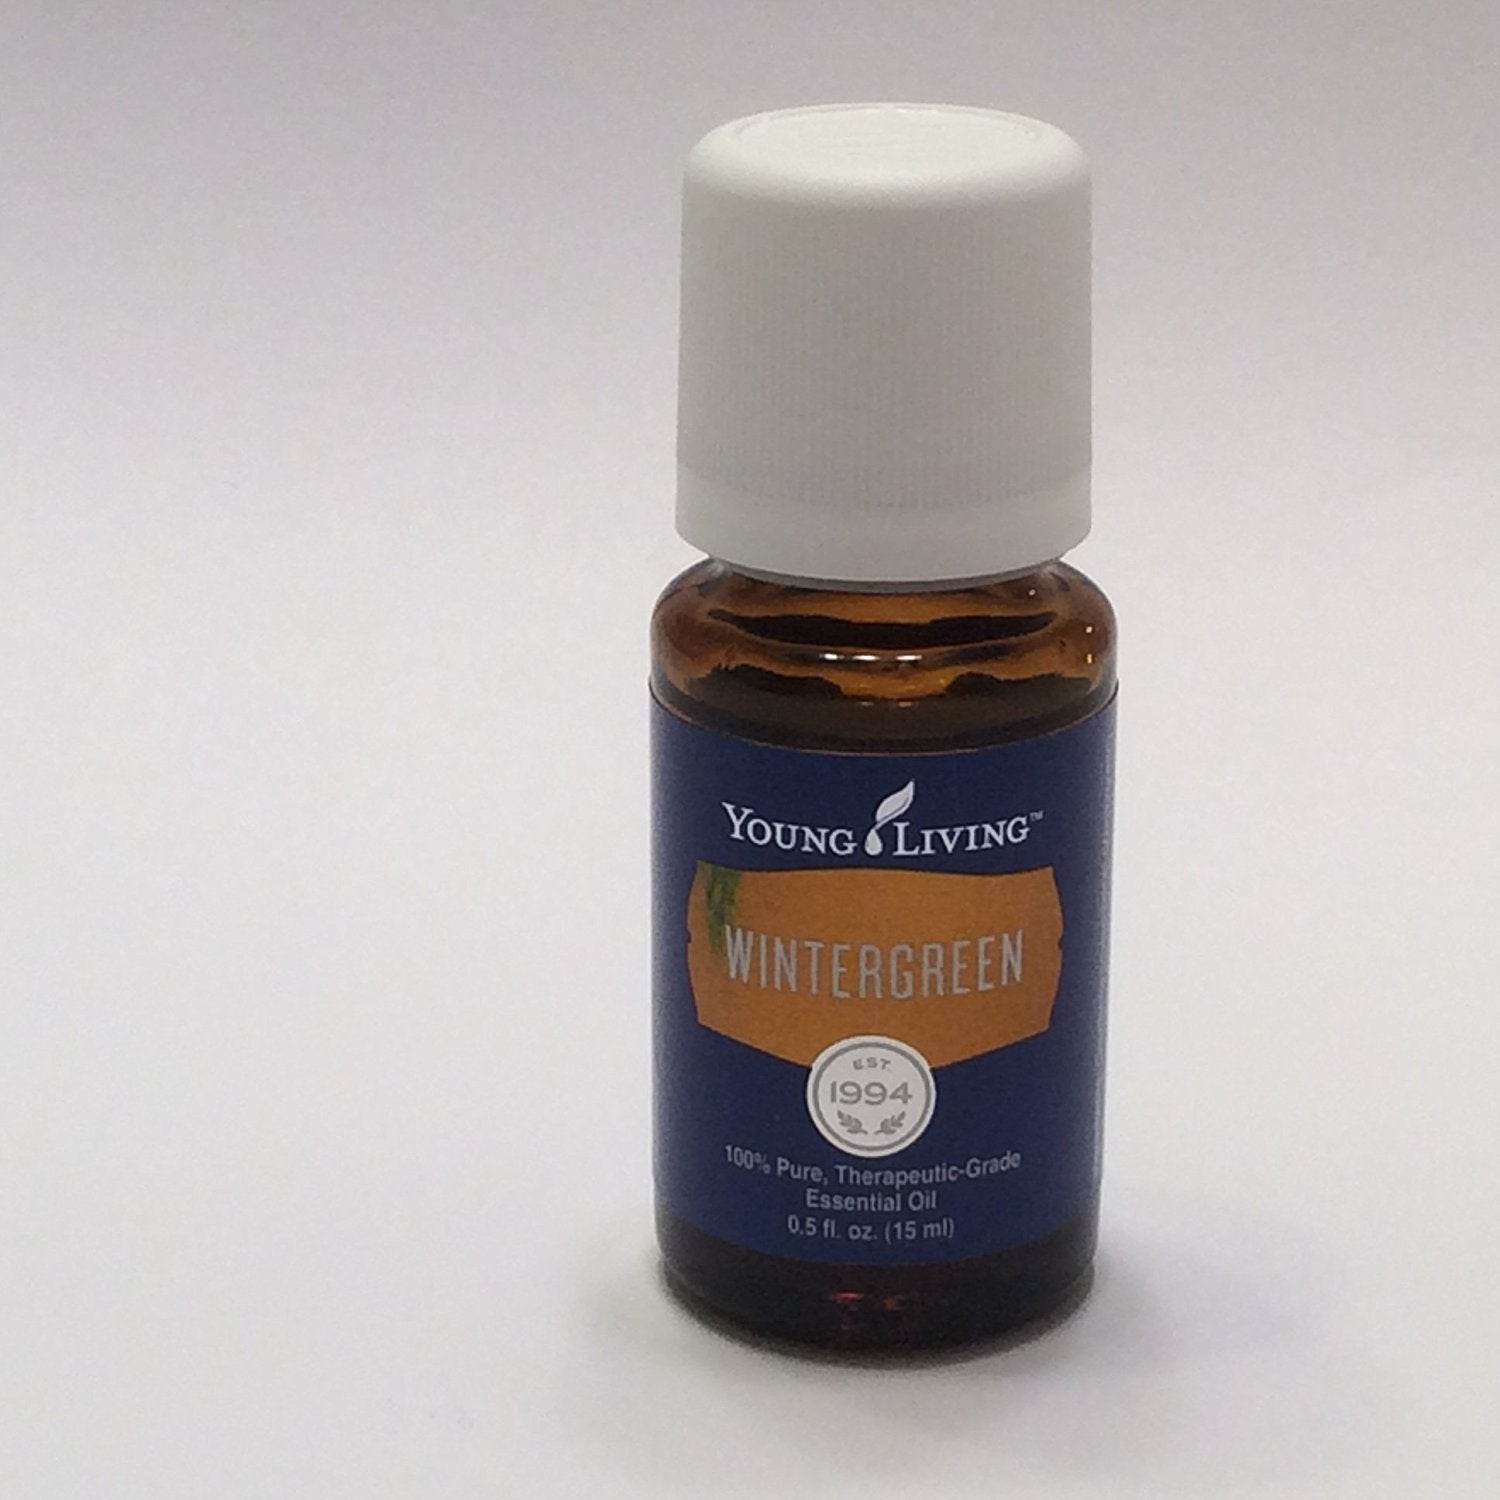 Wintergreen Essetial Oil 15ml by Young Living Essential Oil